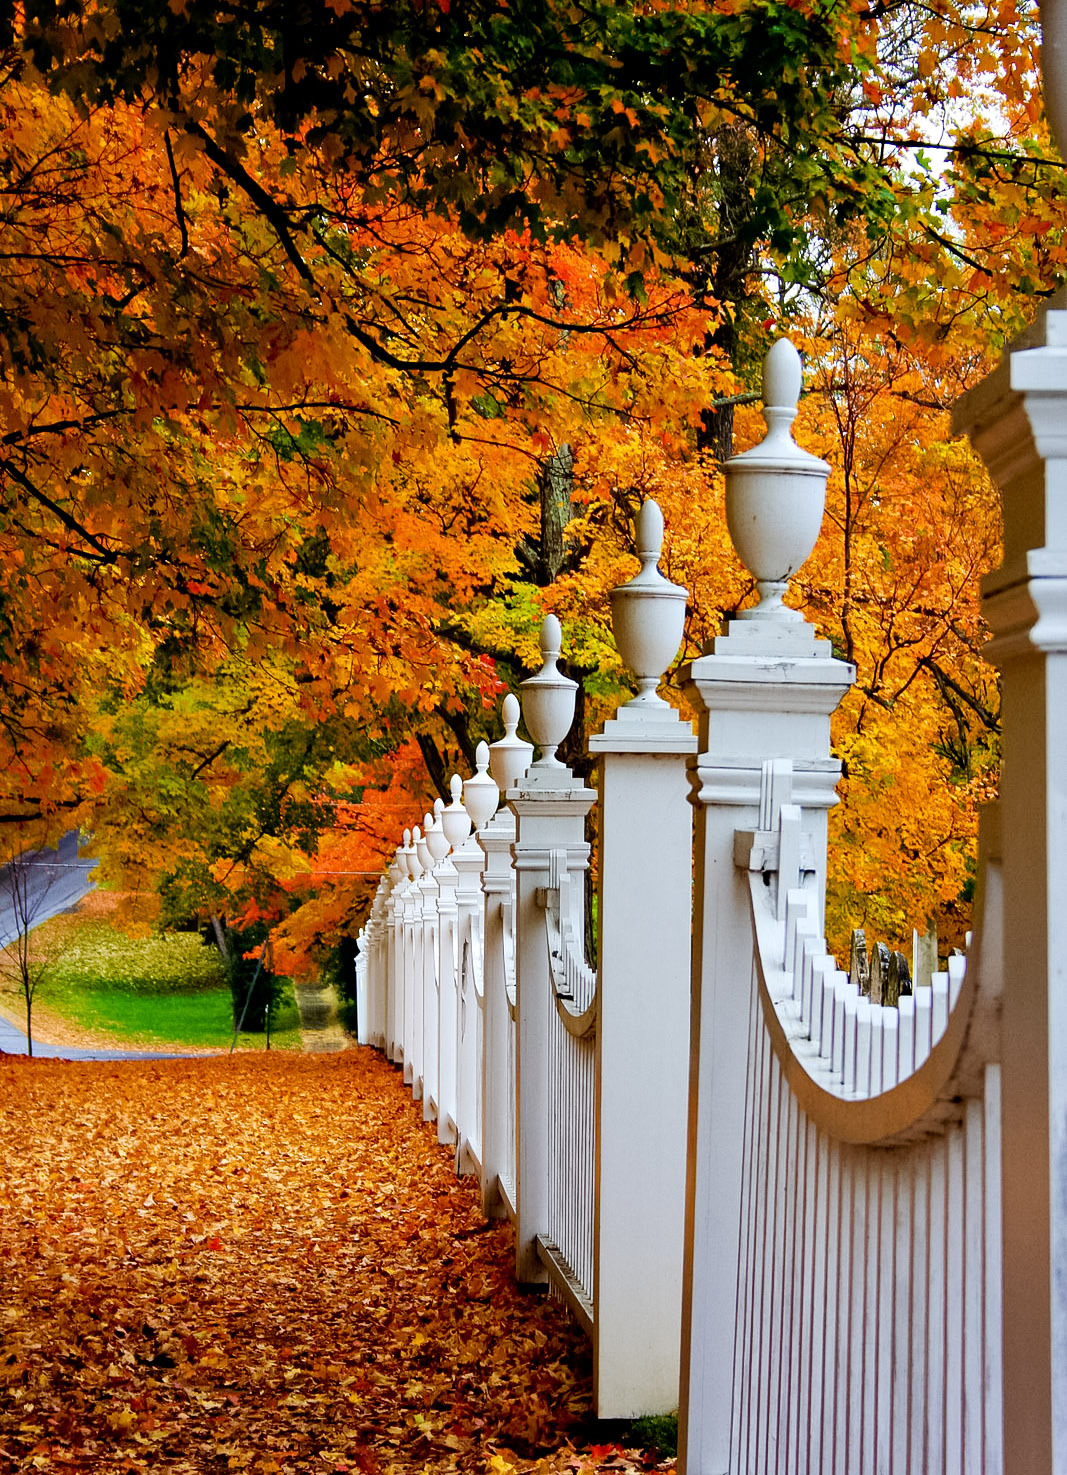 coiour-my-world:
“Autumn Fence, Woodstock, Vermont
”
A walk down a country road,
not knowing what it may hold.
Leaves crunch loudly beneath my feet,
walking fast is no easy feat.
I need to get home to make dinner,
I’d hoped the walk would make me...